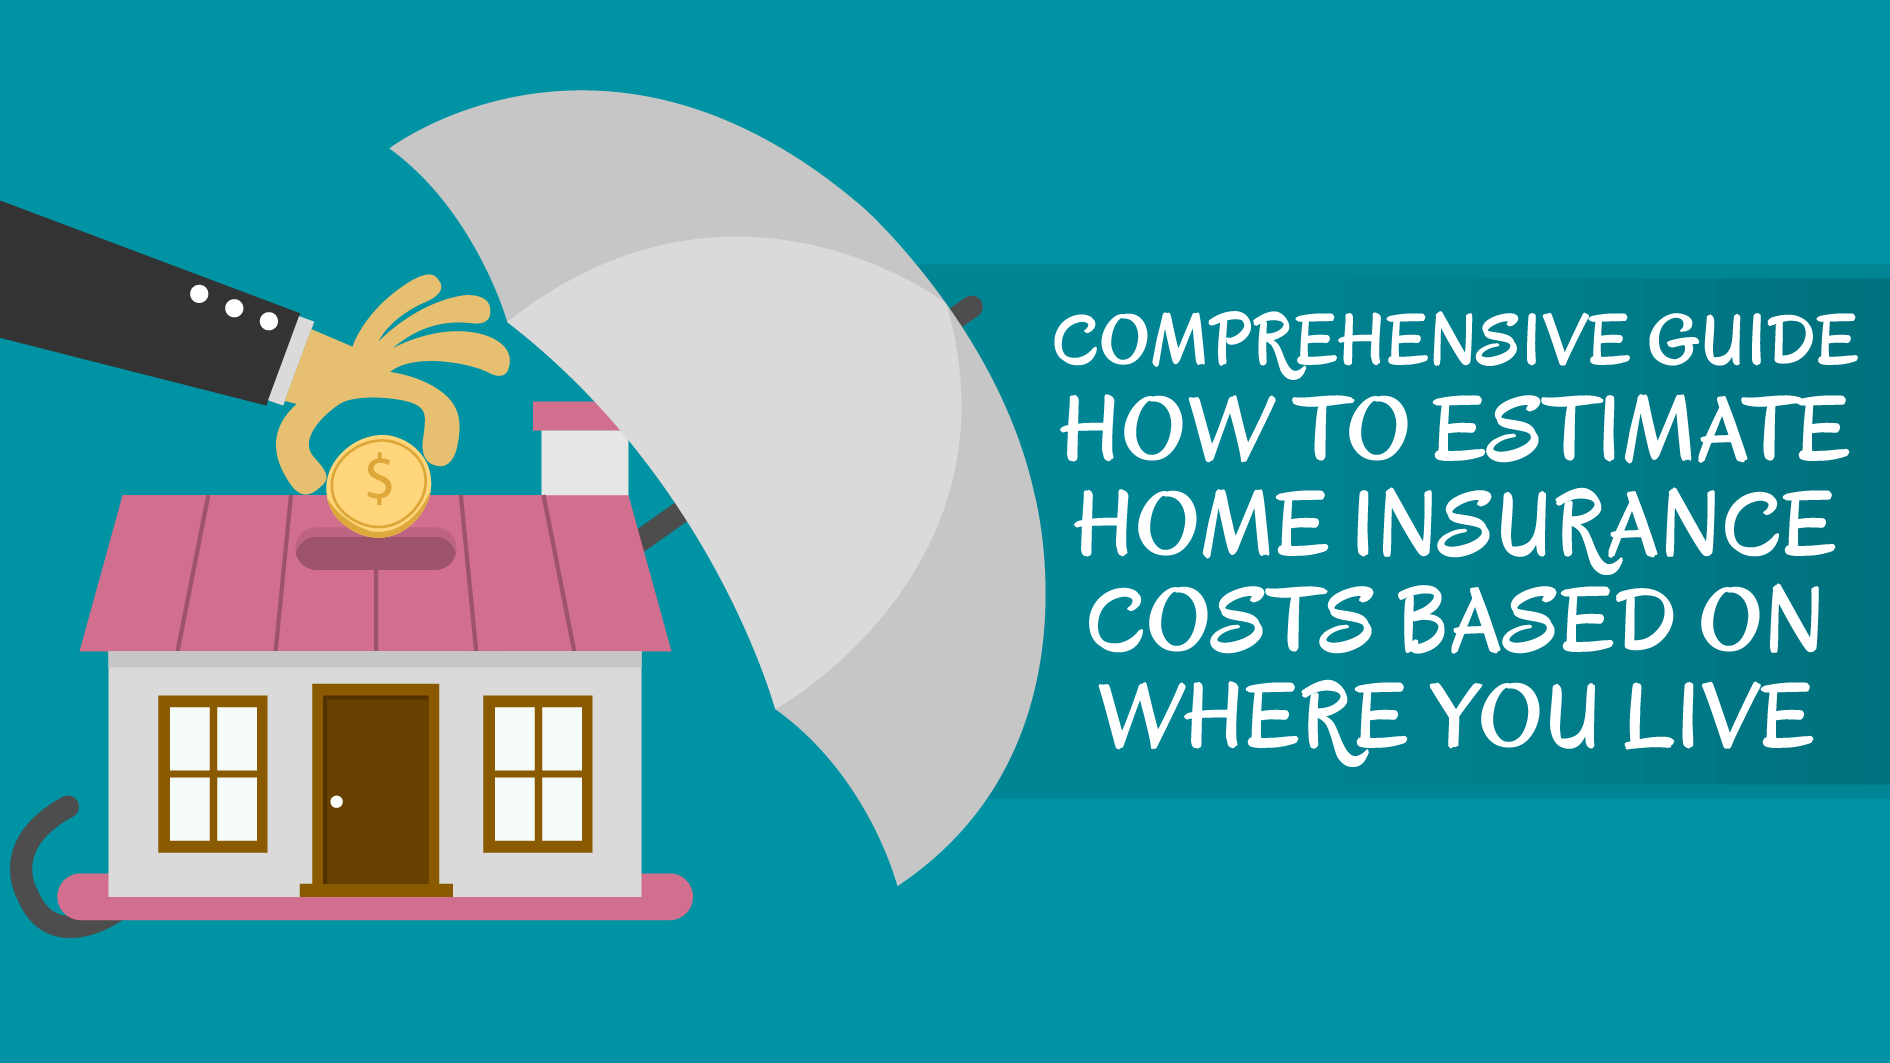 Comprehensive Guide: How to Estimate Home Insurance Costs Based on Where You Live